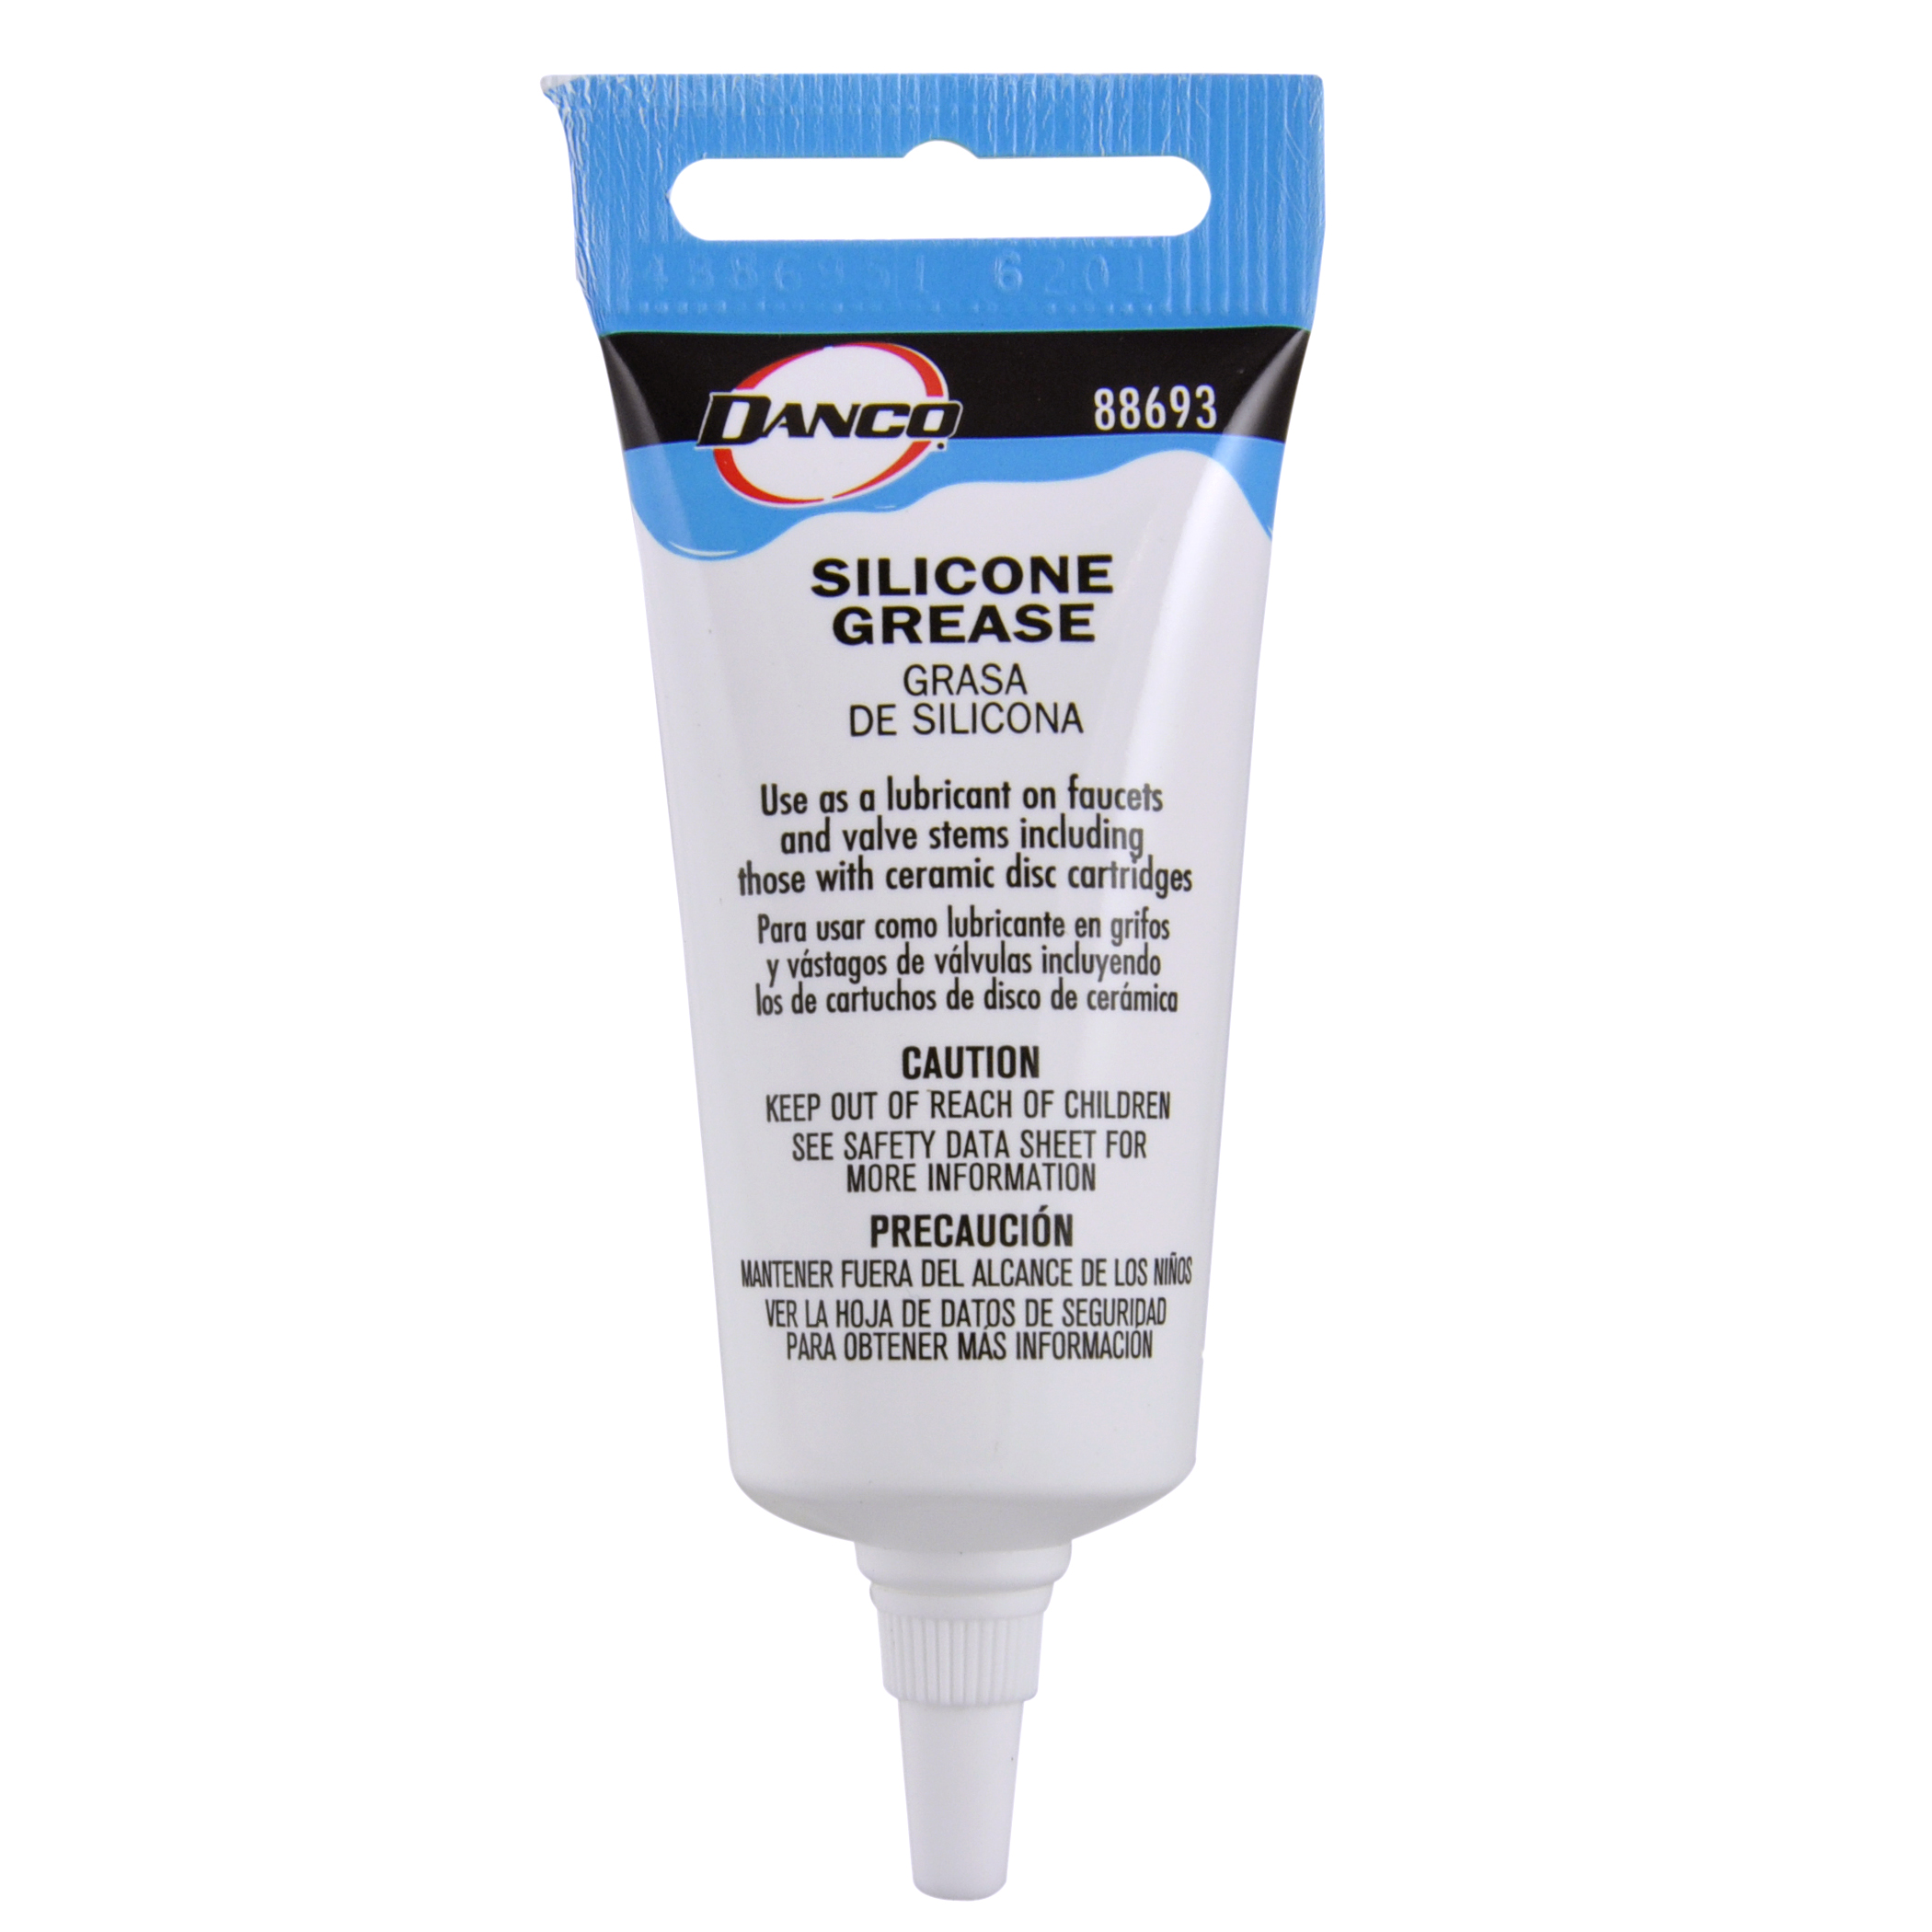 SILICONE GREASE For Plumbers O-Rings Seals Airsoft Waterproofing Gaske –  emf Sports